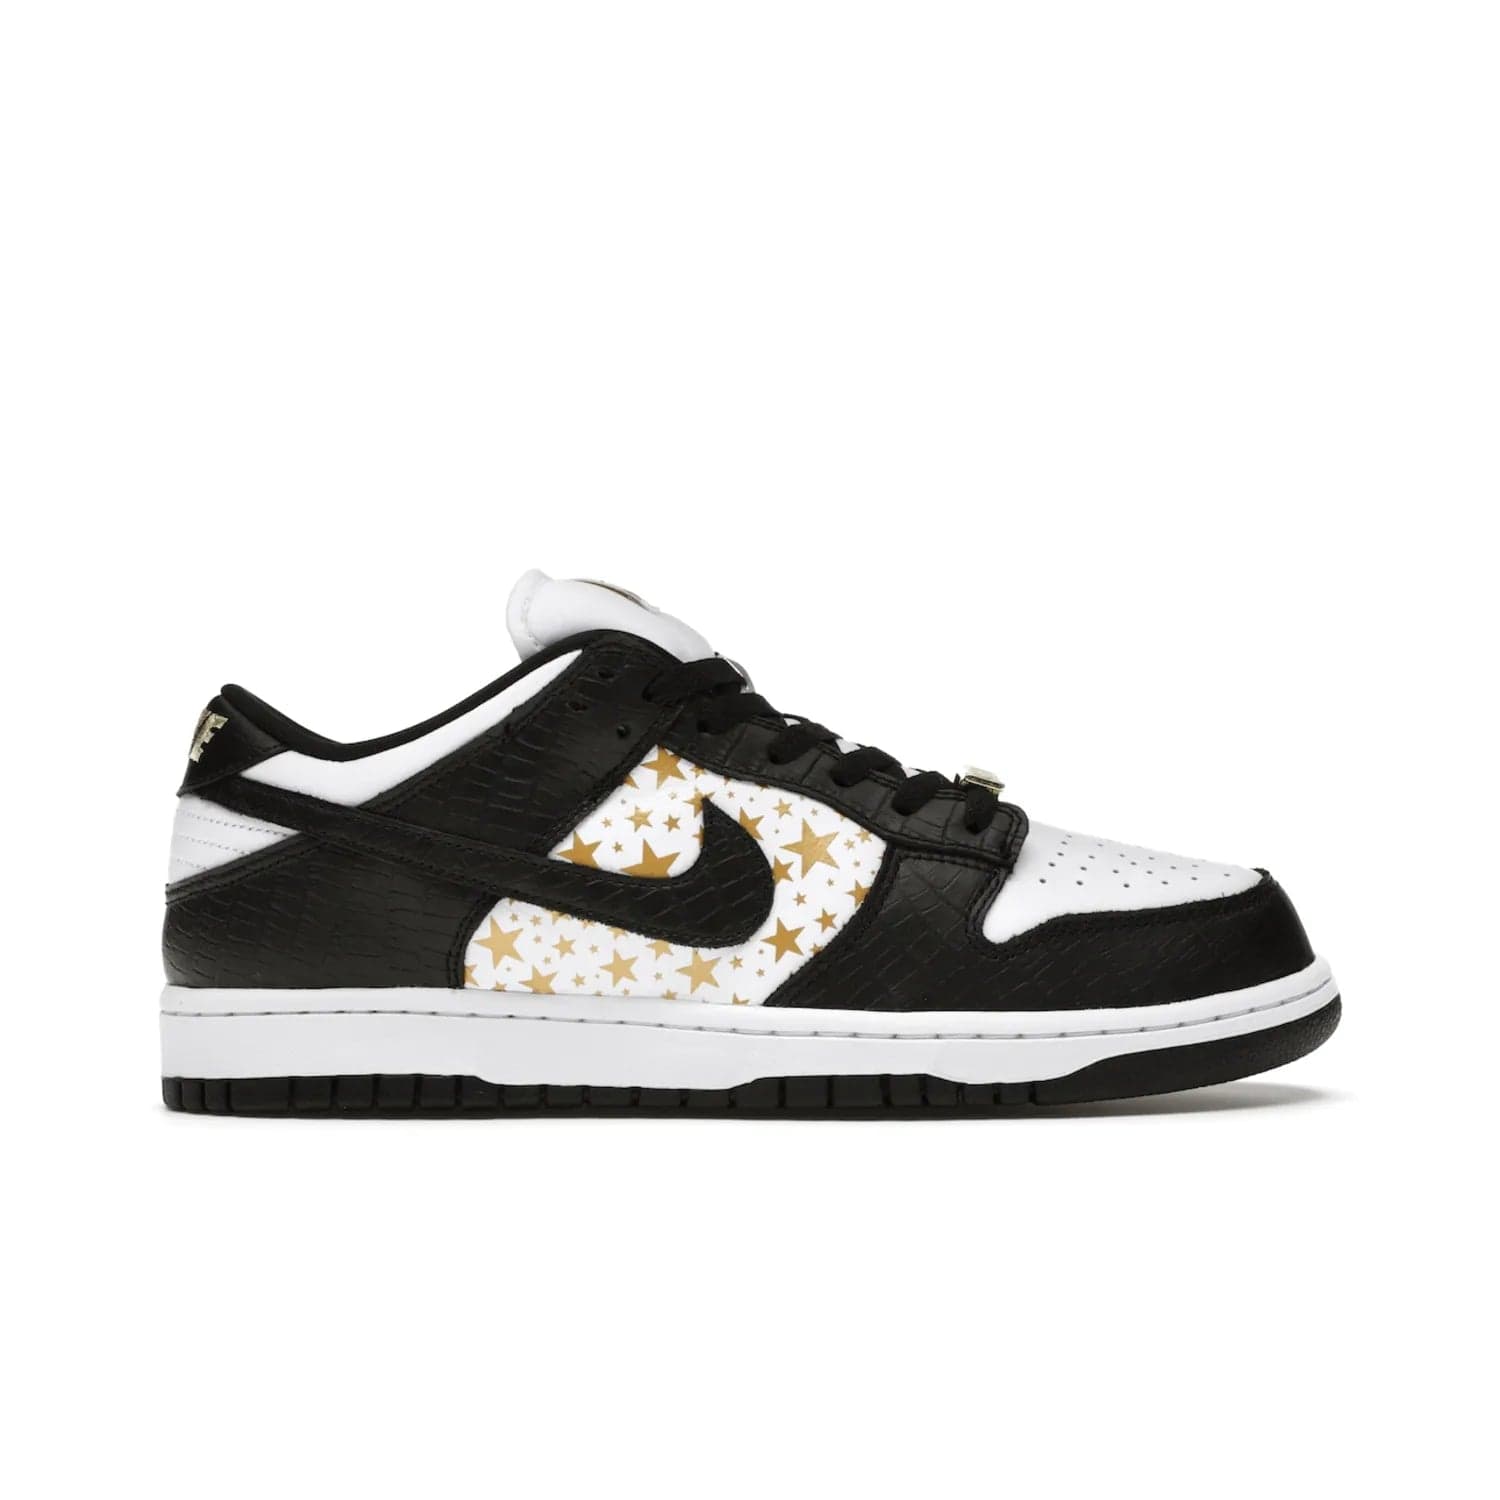 Nike SB Dunk Low Supreme Stars Black (2021) - Image 1 - Only at www.BallersClubKickz.com - Retro style and signature details make the Nike SB Dunk Low Supreme Black a must-have. This special edition shoe features a white leather upper and black croc skin overlays complemented by gold stars and deubré. Enjoy a piece of SB history and grab yours today.